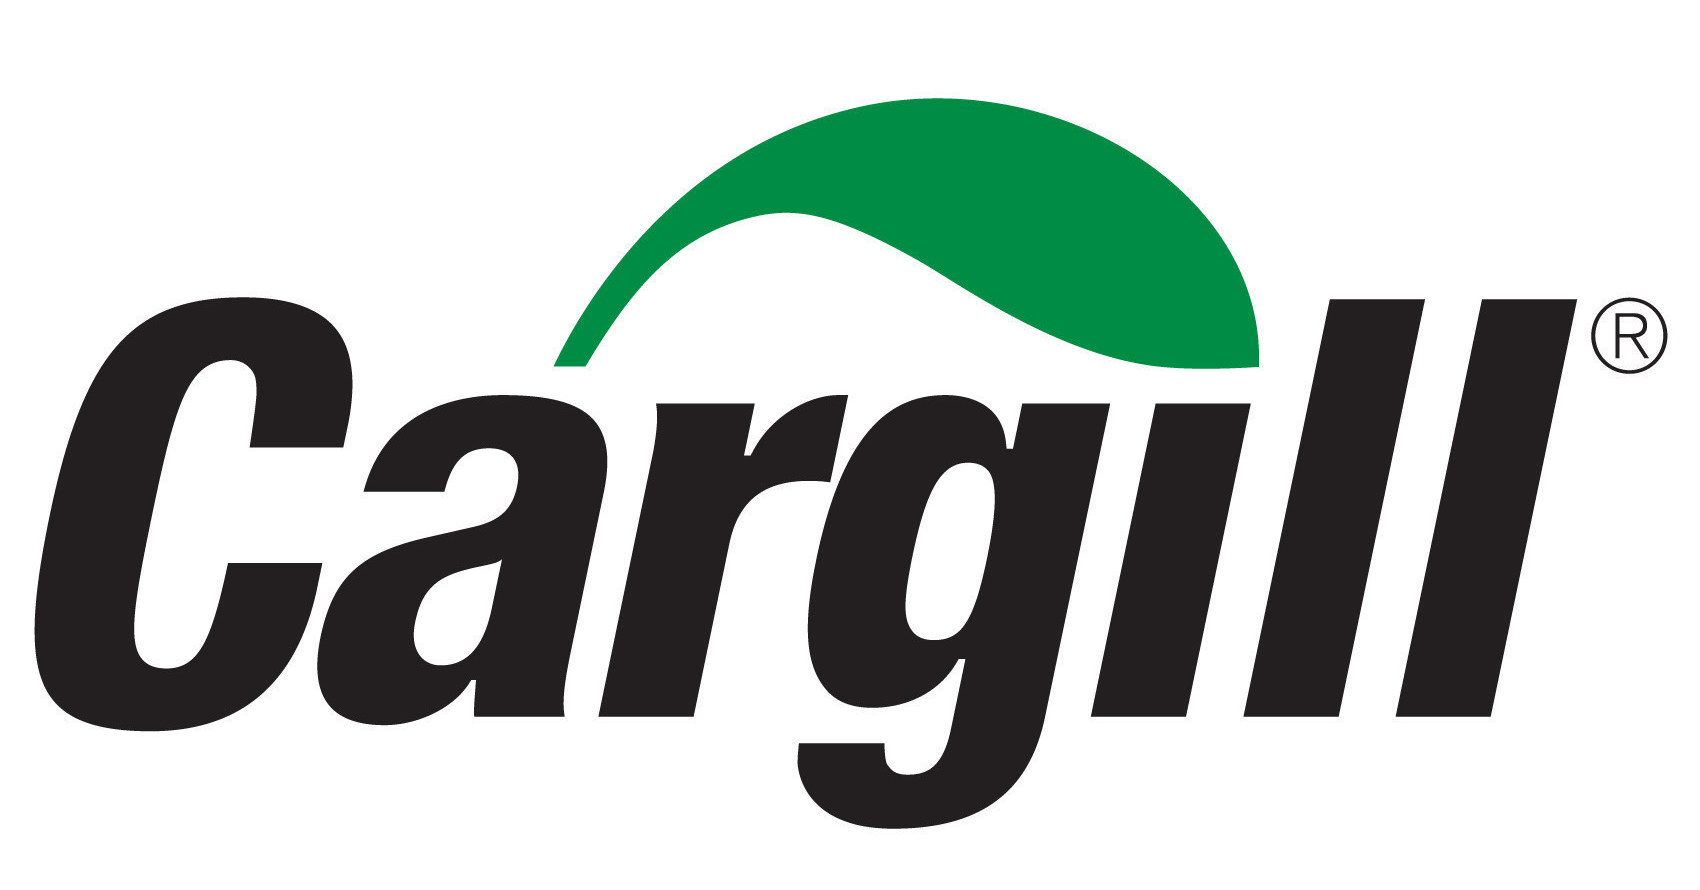 Cargill commits to restoring 600 billion liters of water by 2030 - PRNewswire